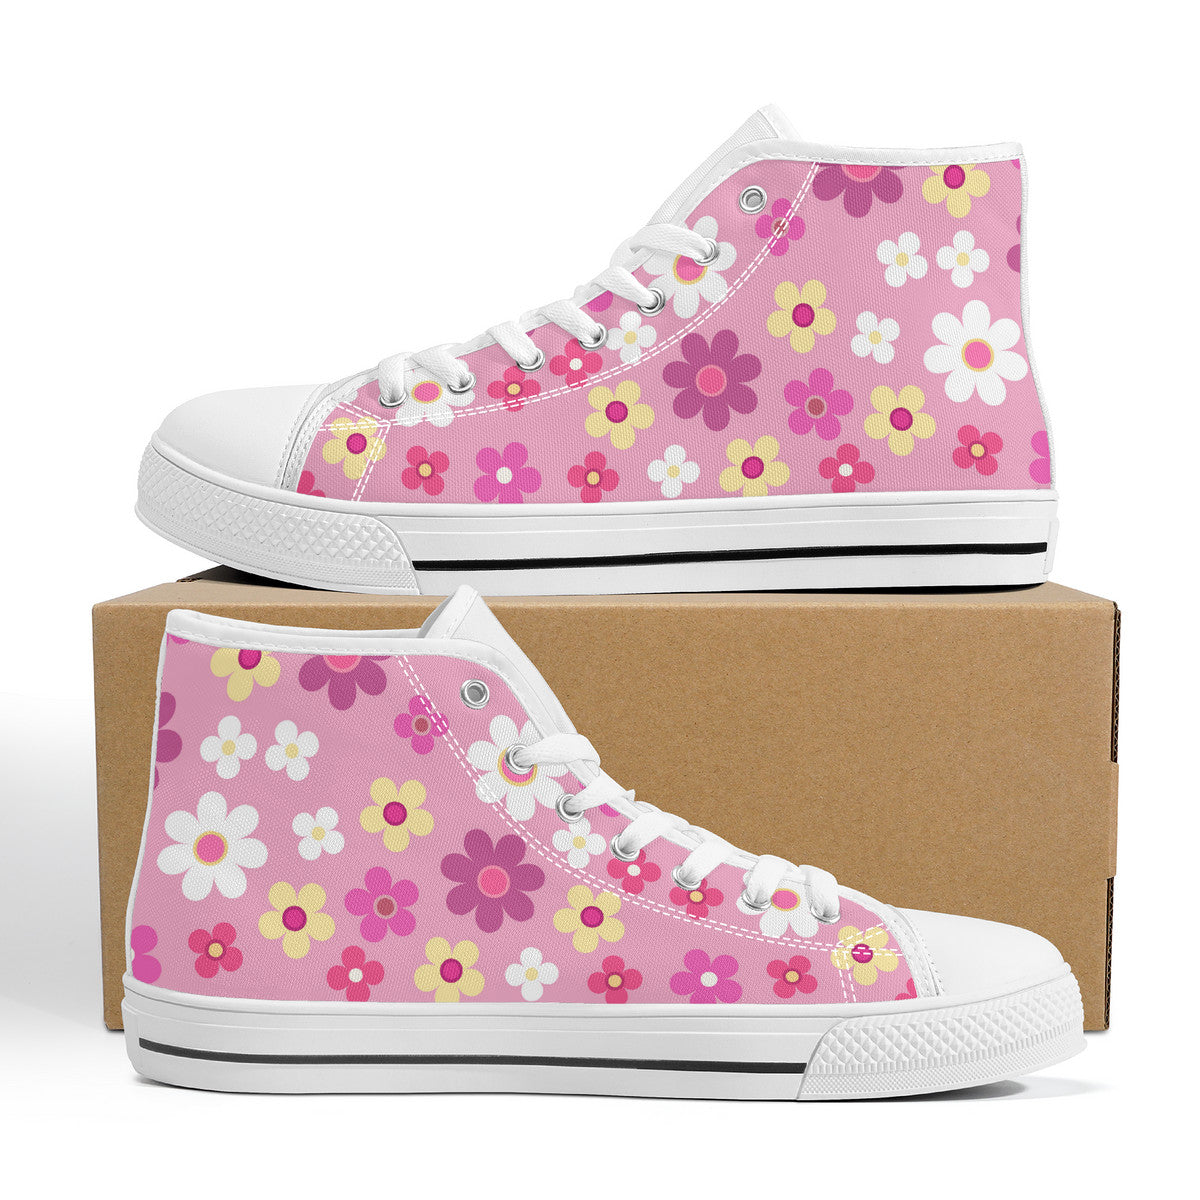 Kasumi Mist Pink High-Top Shoes on a box